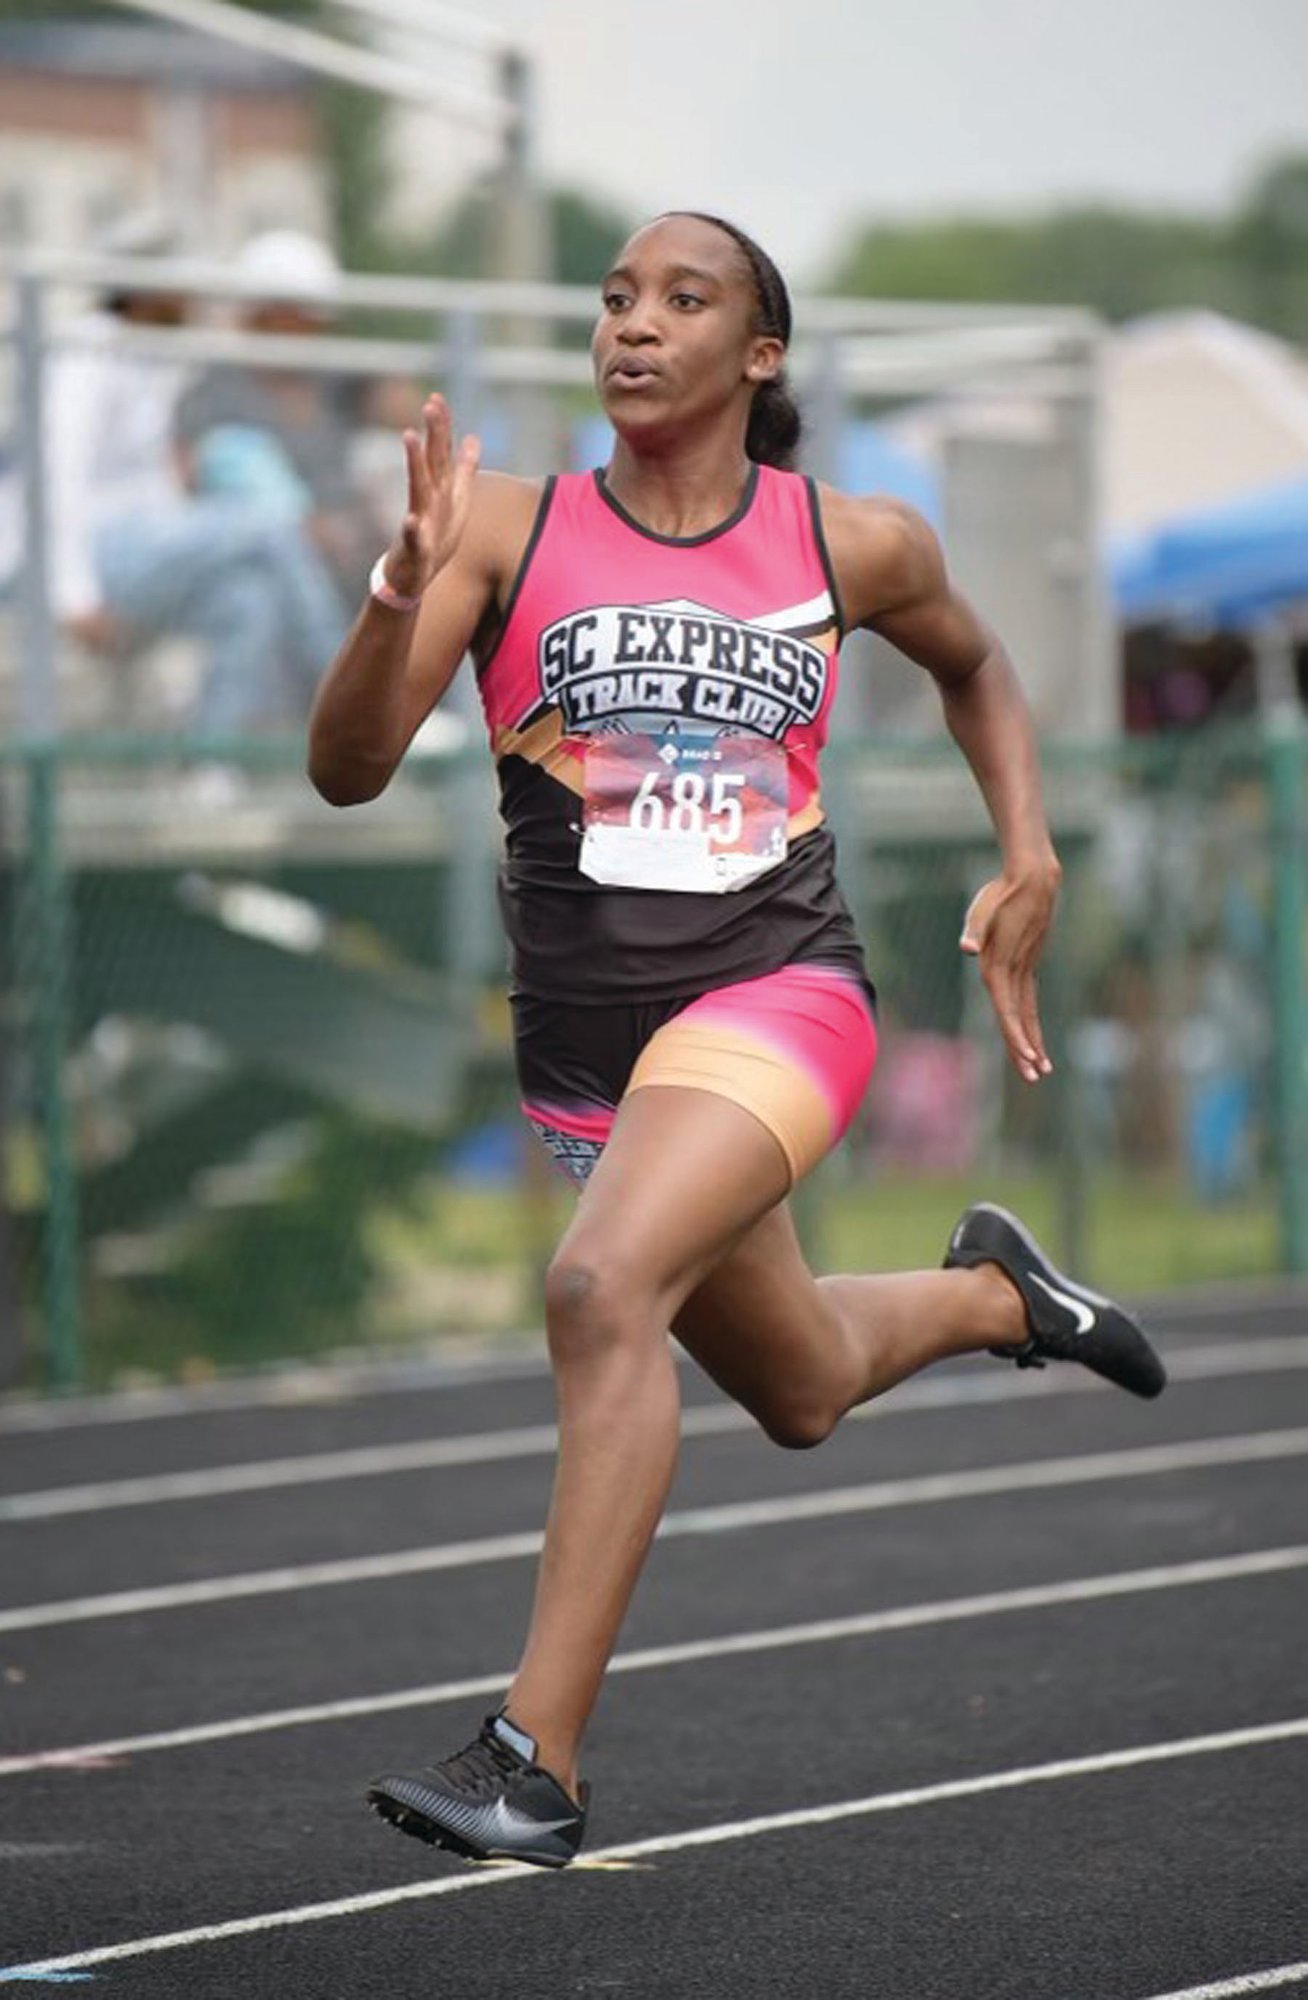 West County track athletes win gold medals at AAU Junior Olympics